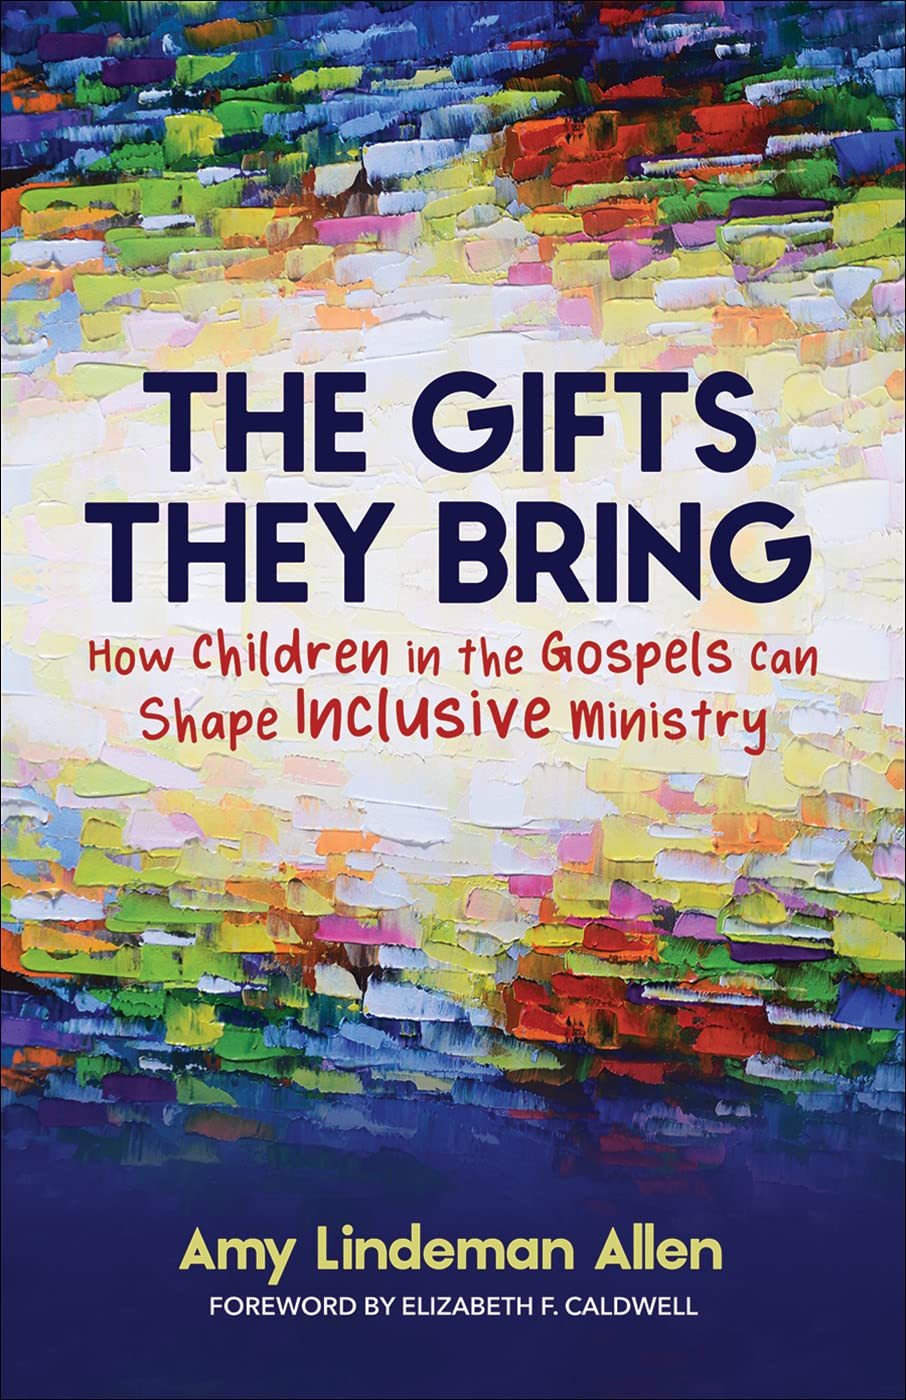 The gifts they bring how children in the gospels can shape inclusive ministry.